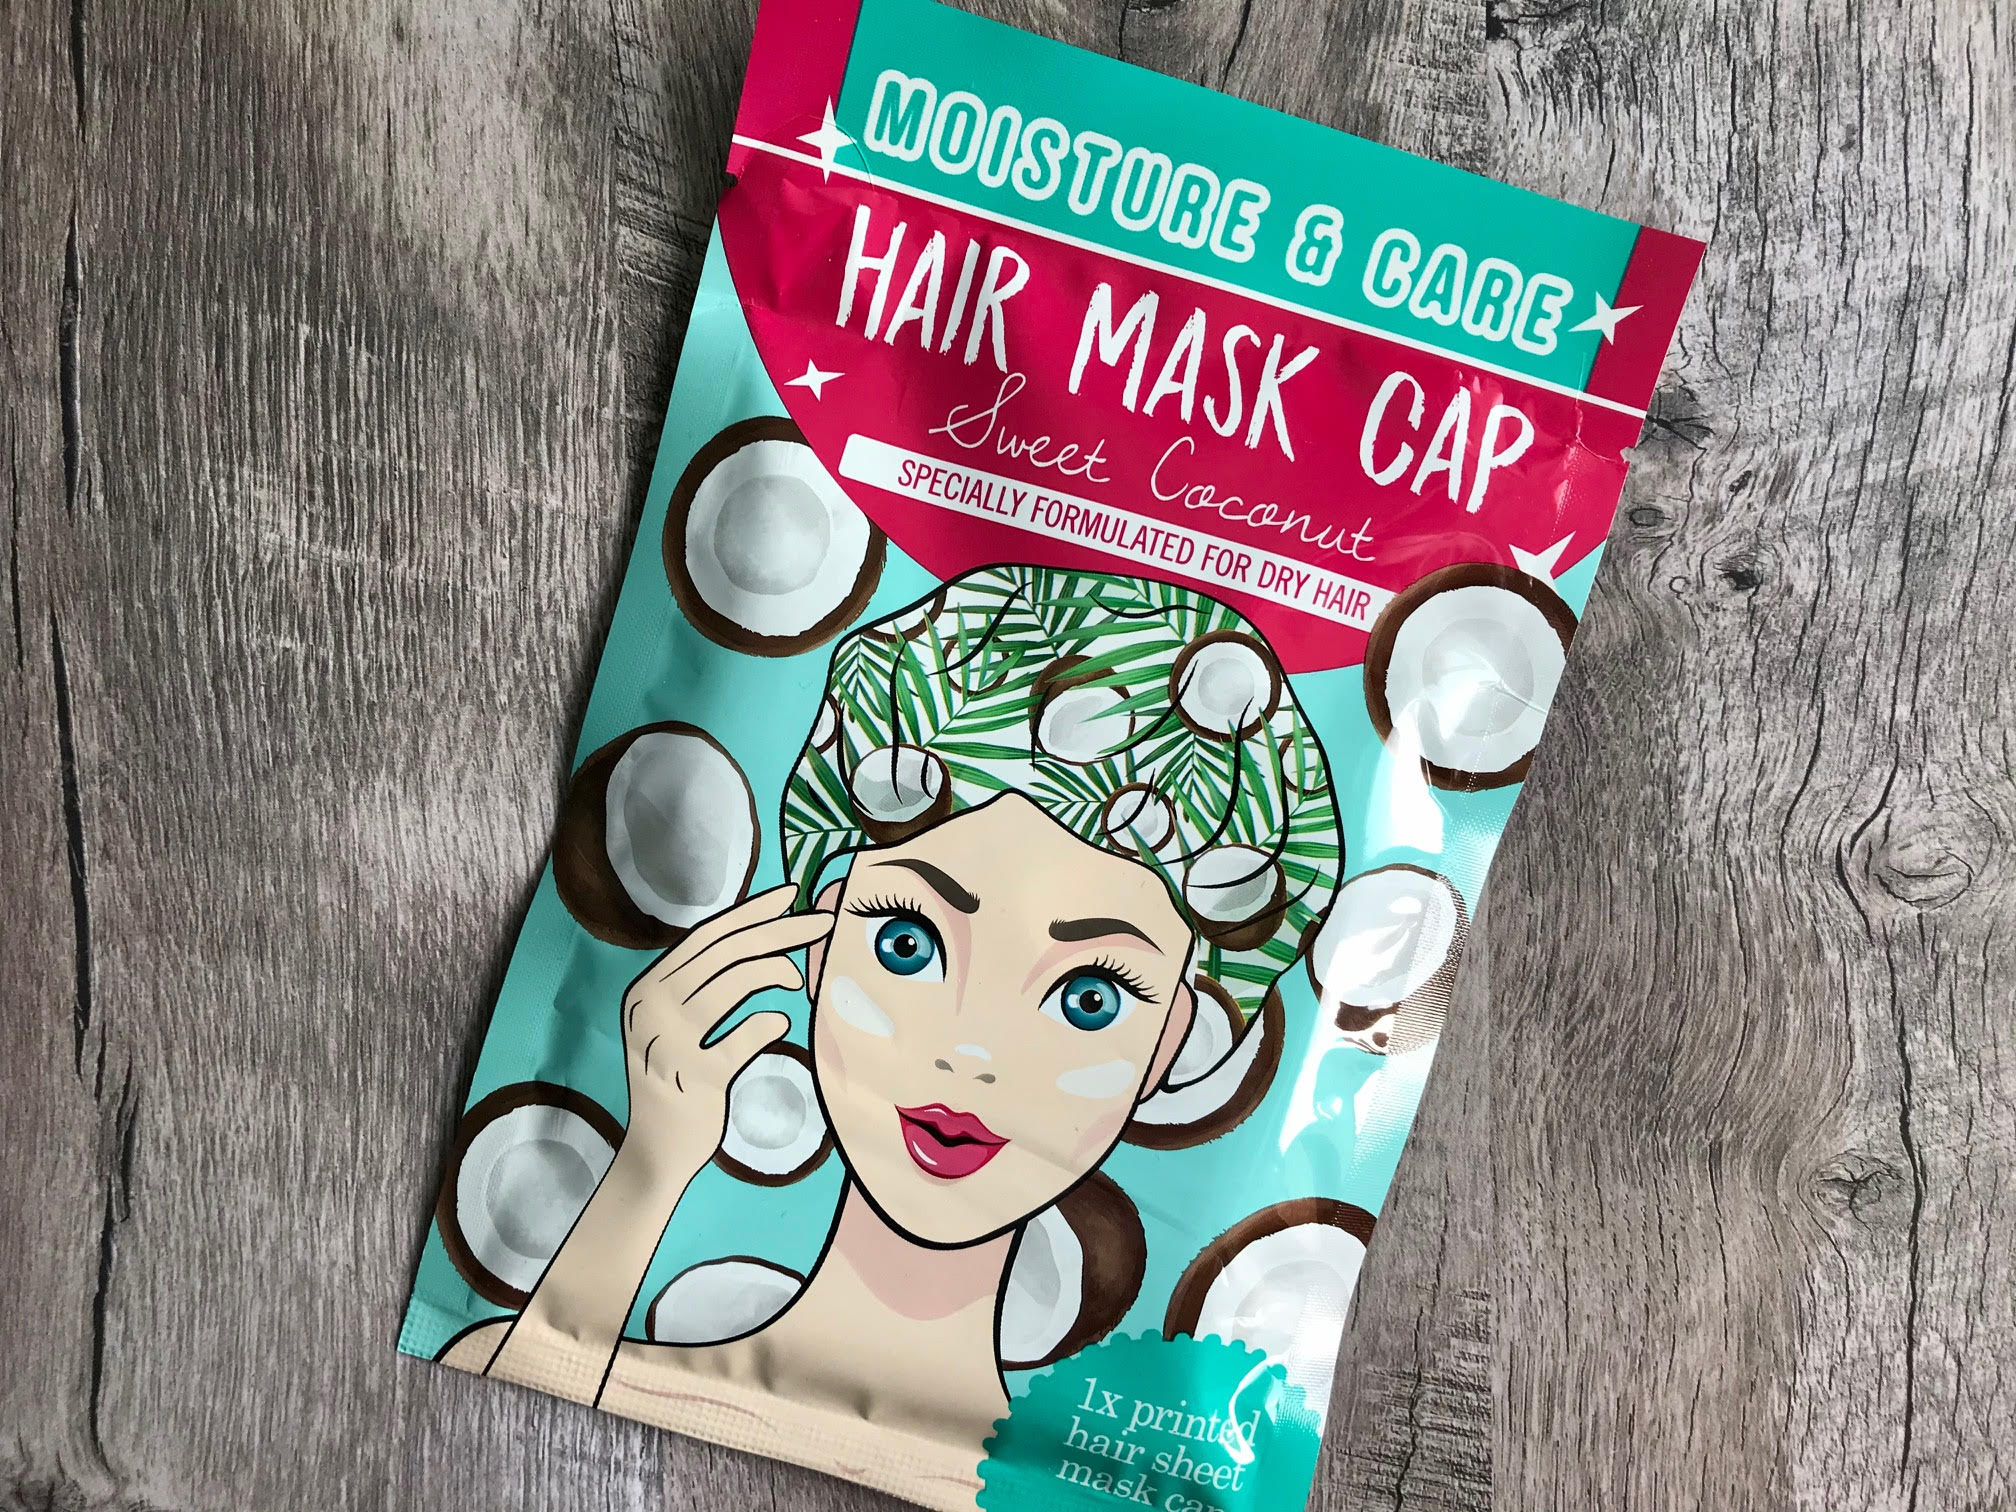 action hair mask cap sweet coconut